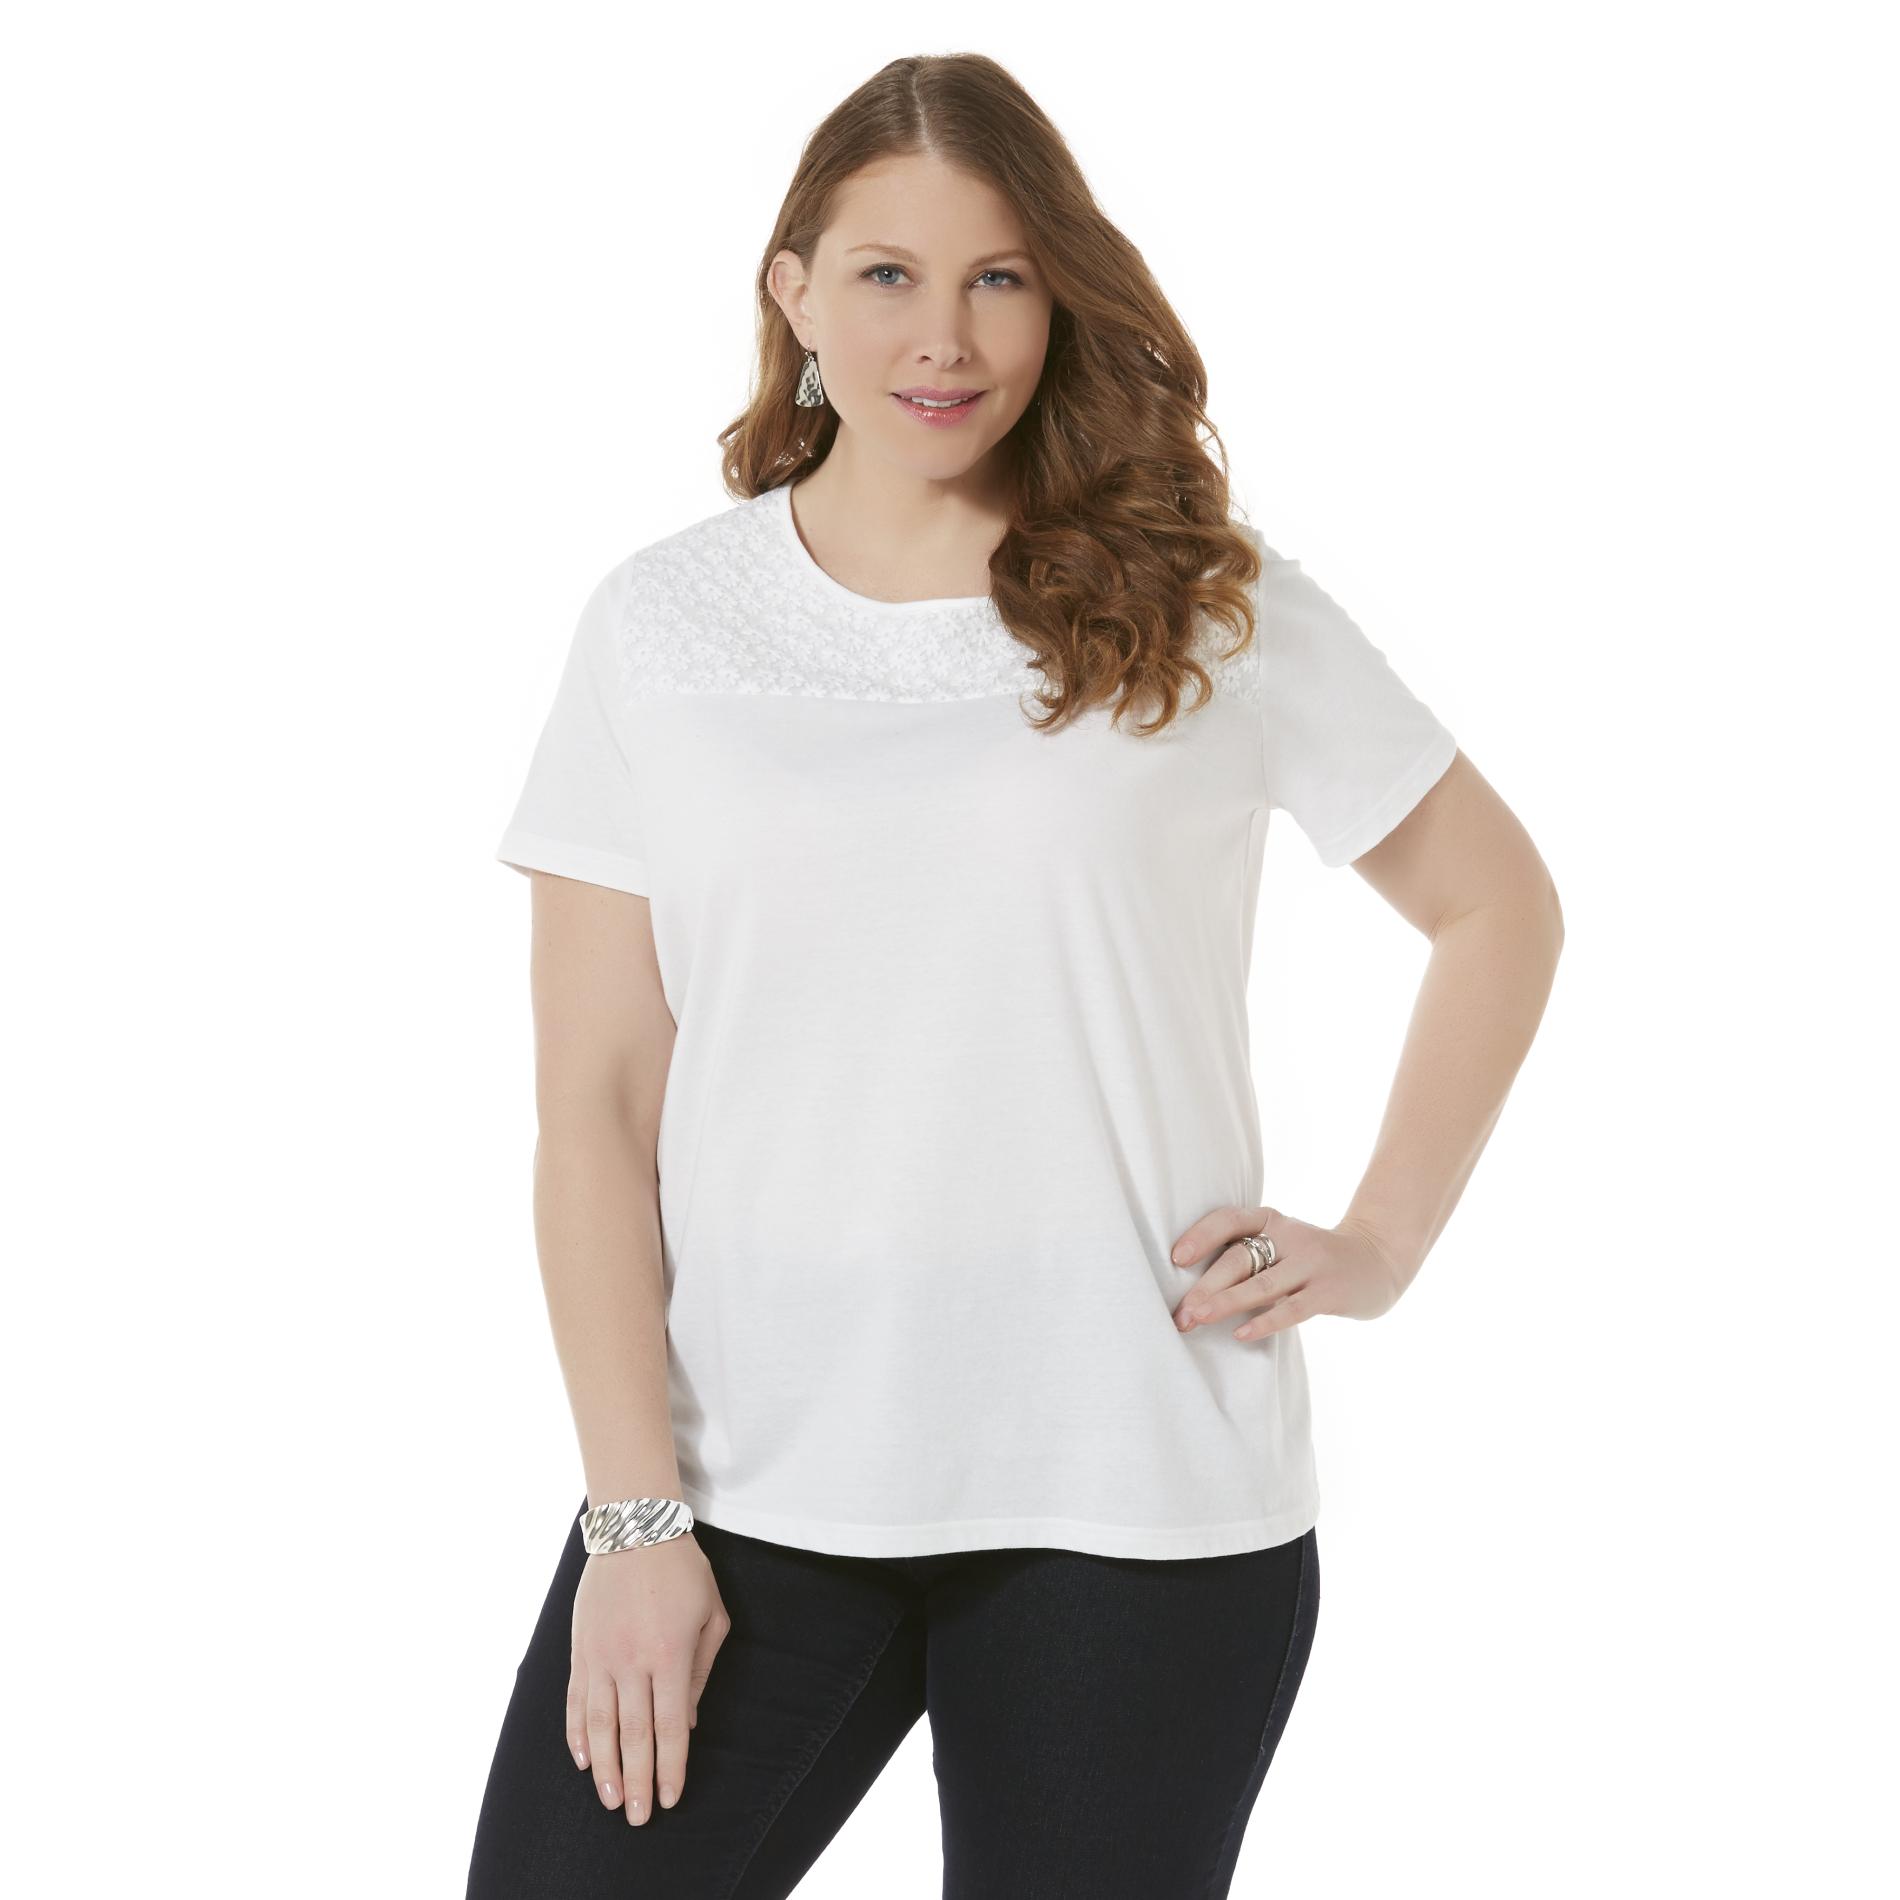 Basic Editions Women's Plus Embellished Top